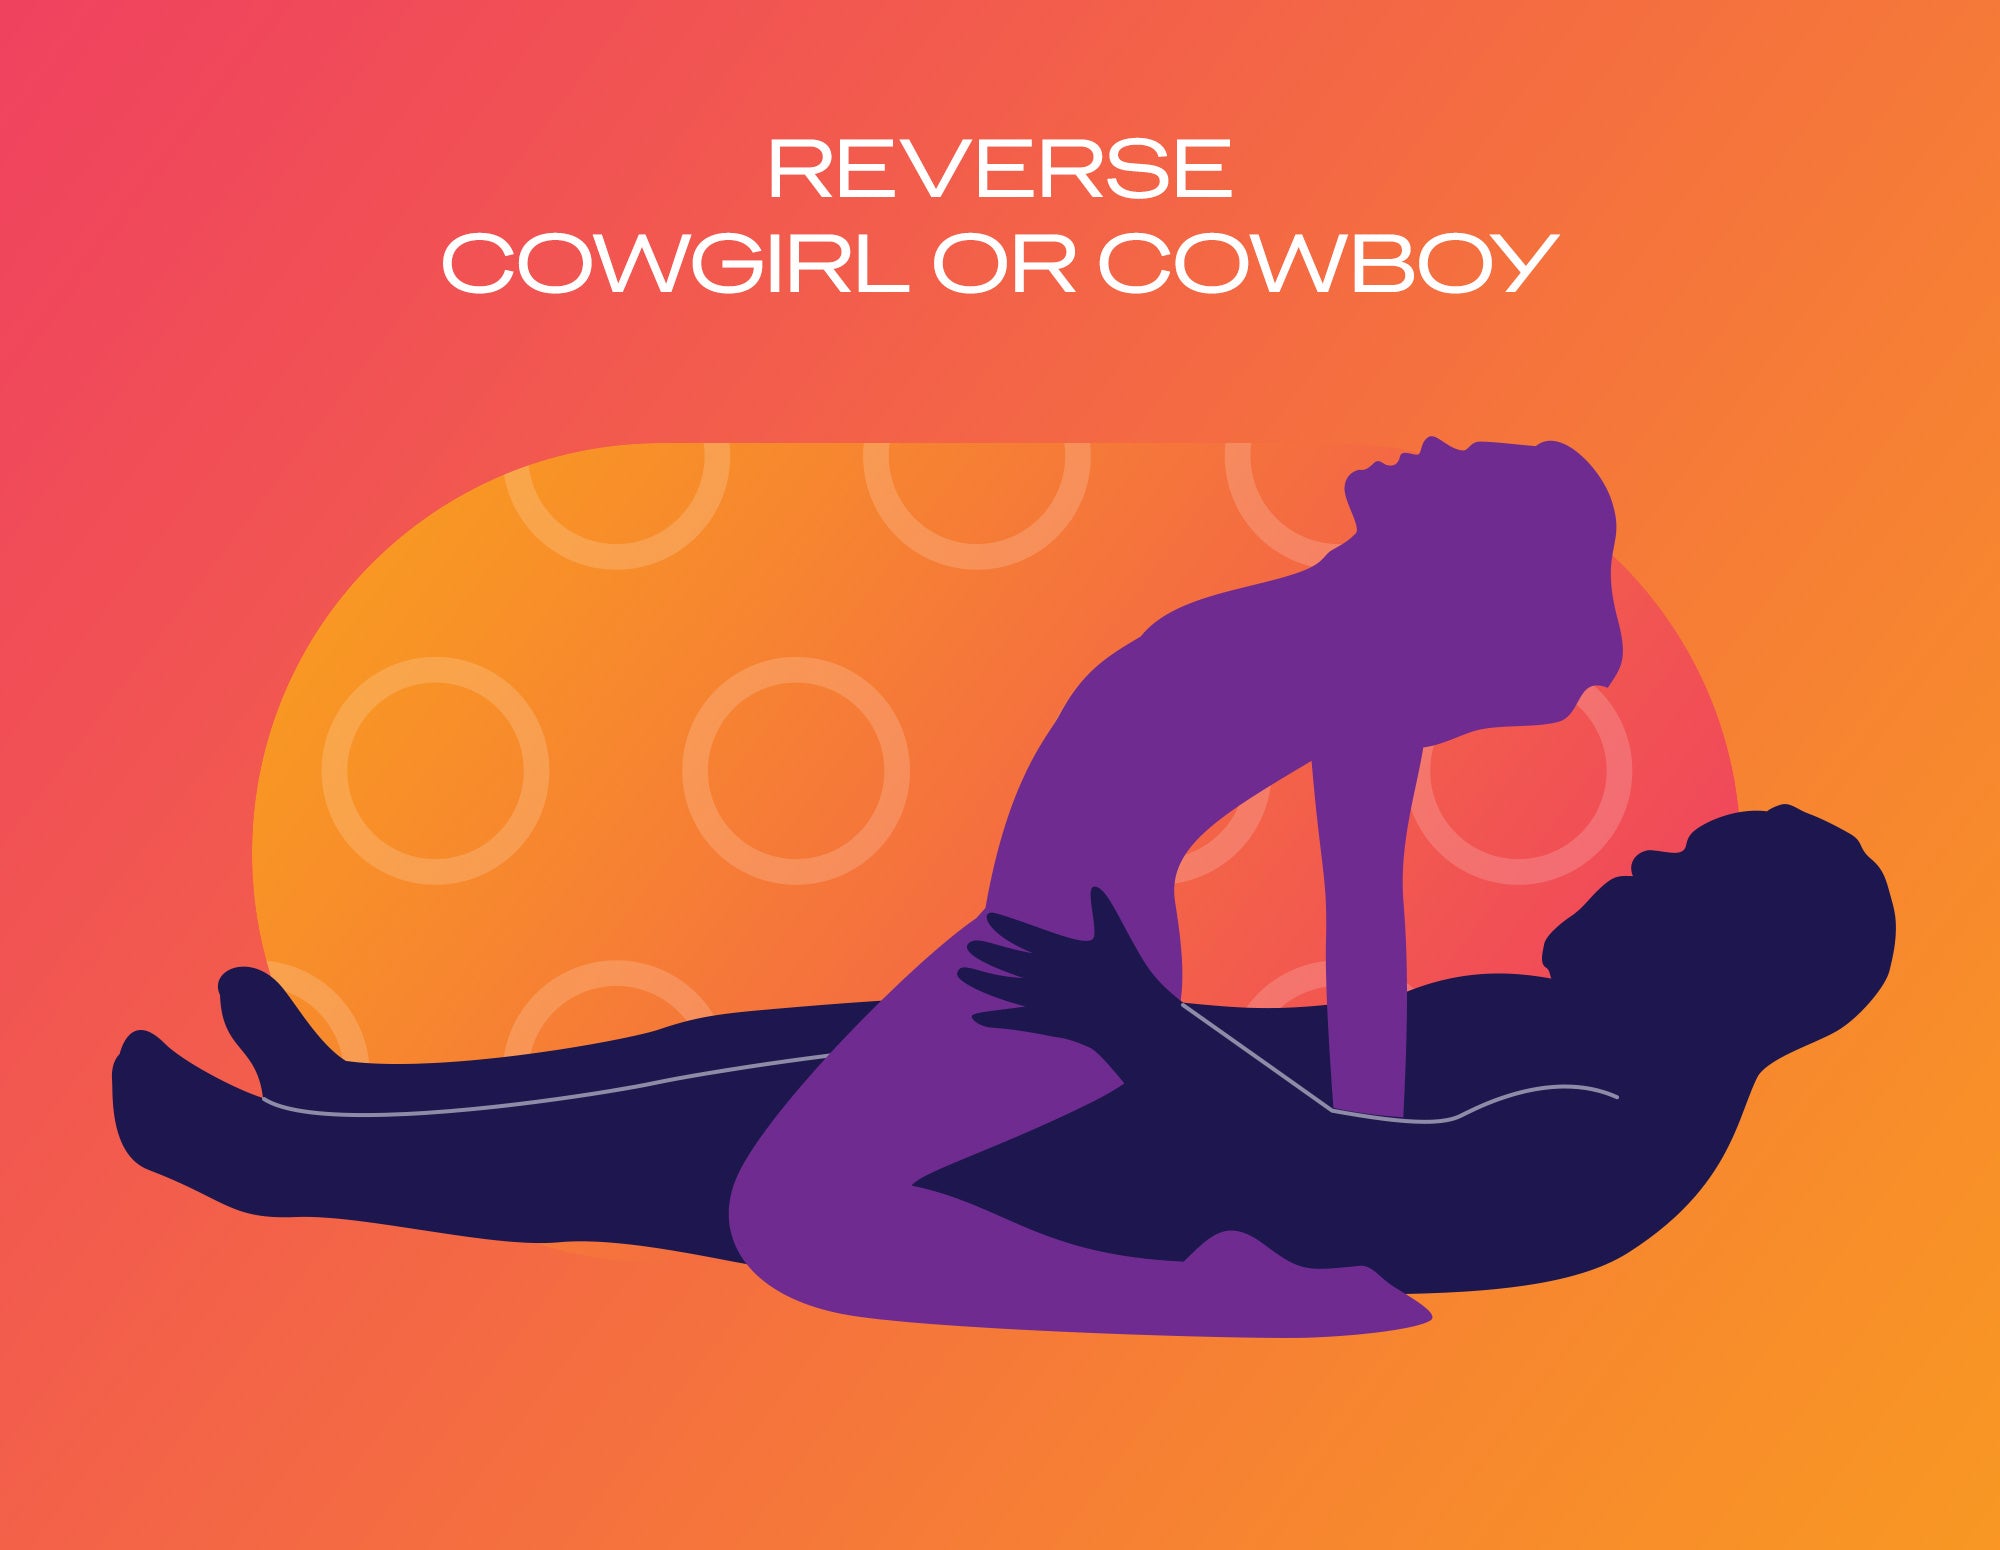 Reverse cowgirl or cowboy sex position illustration of man and woman with orange background.